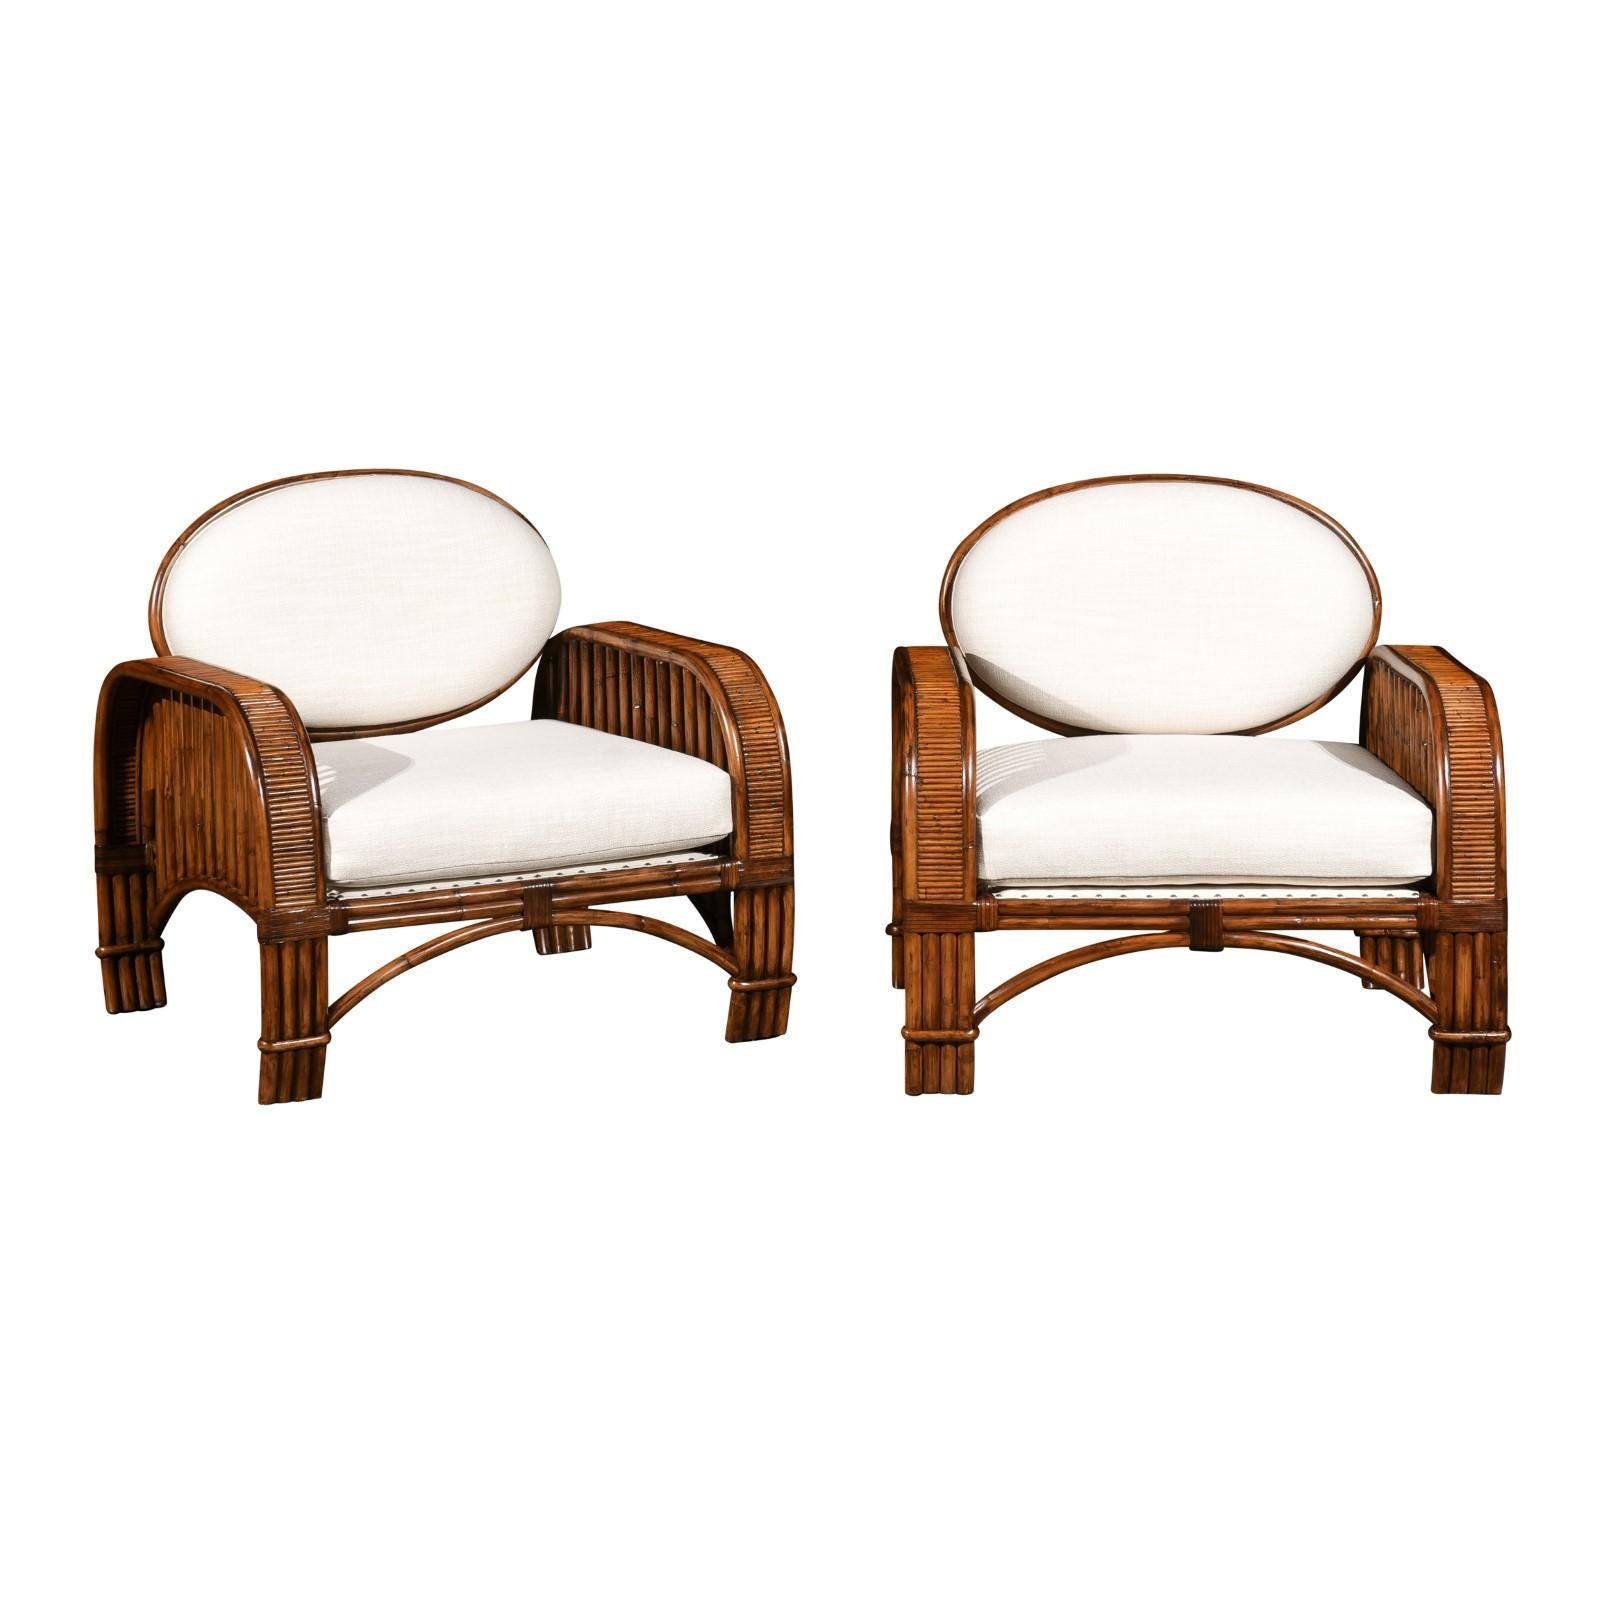 These magnificent club chairs are shipped as professionally photographed and described in the listing narrative: Meticulously professionally restored and upholstered. Completely Installation Ready. Expert custom upholstery service is